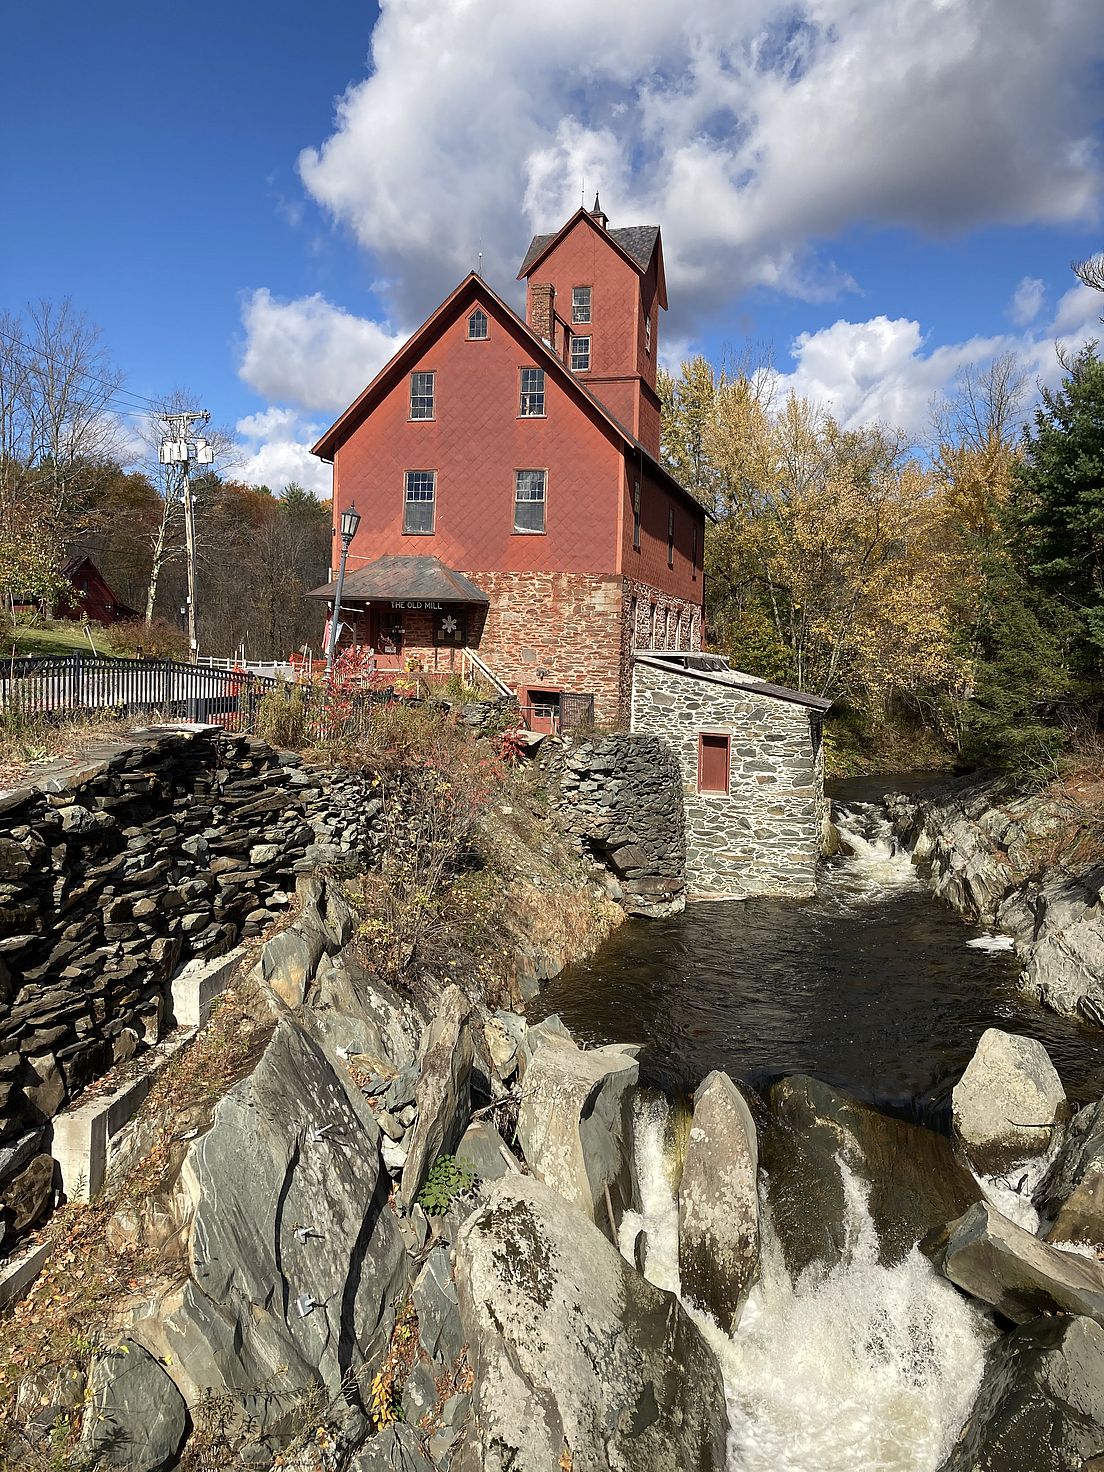 river rushes by the Old Mill in Jericho, VT